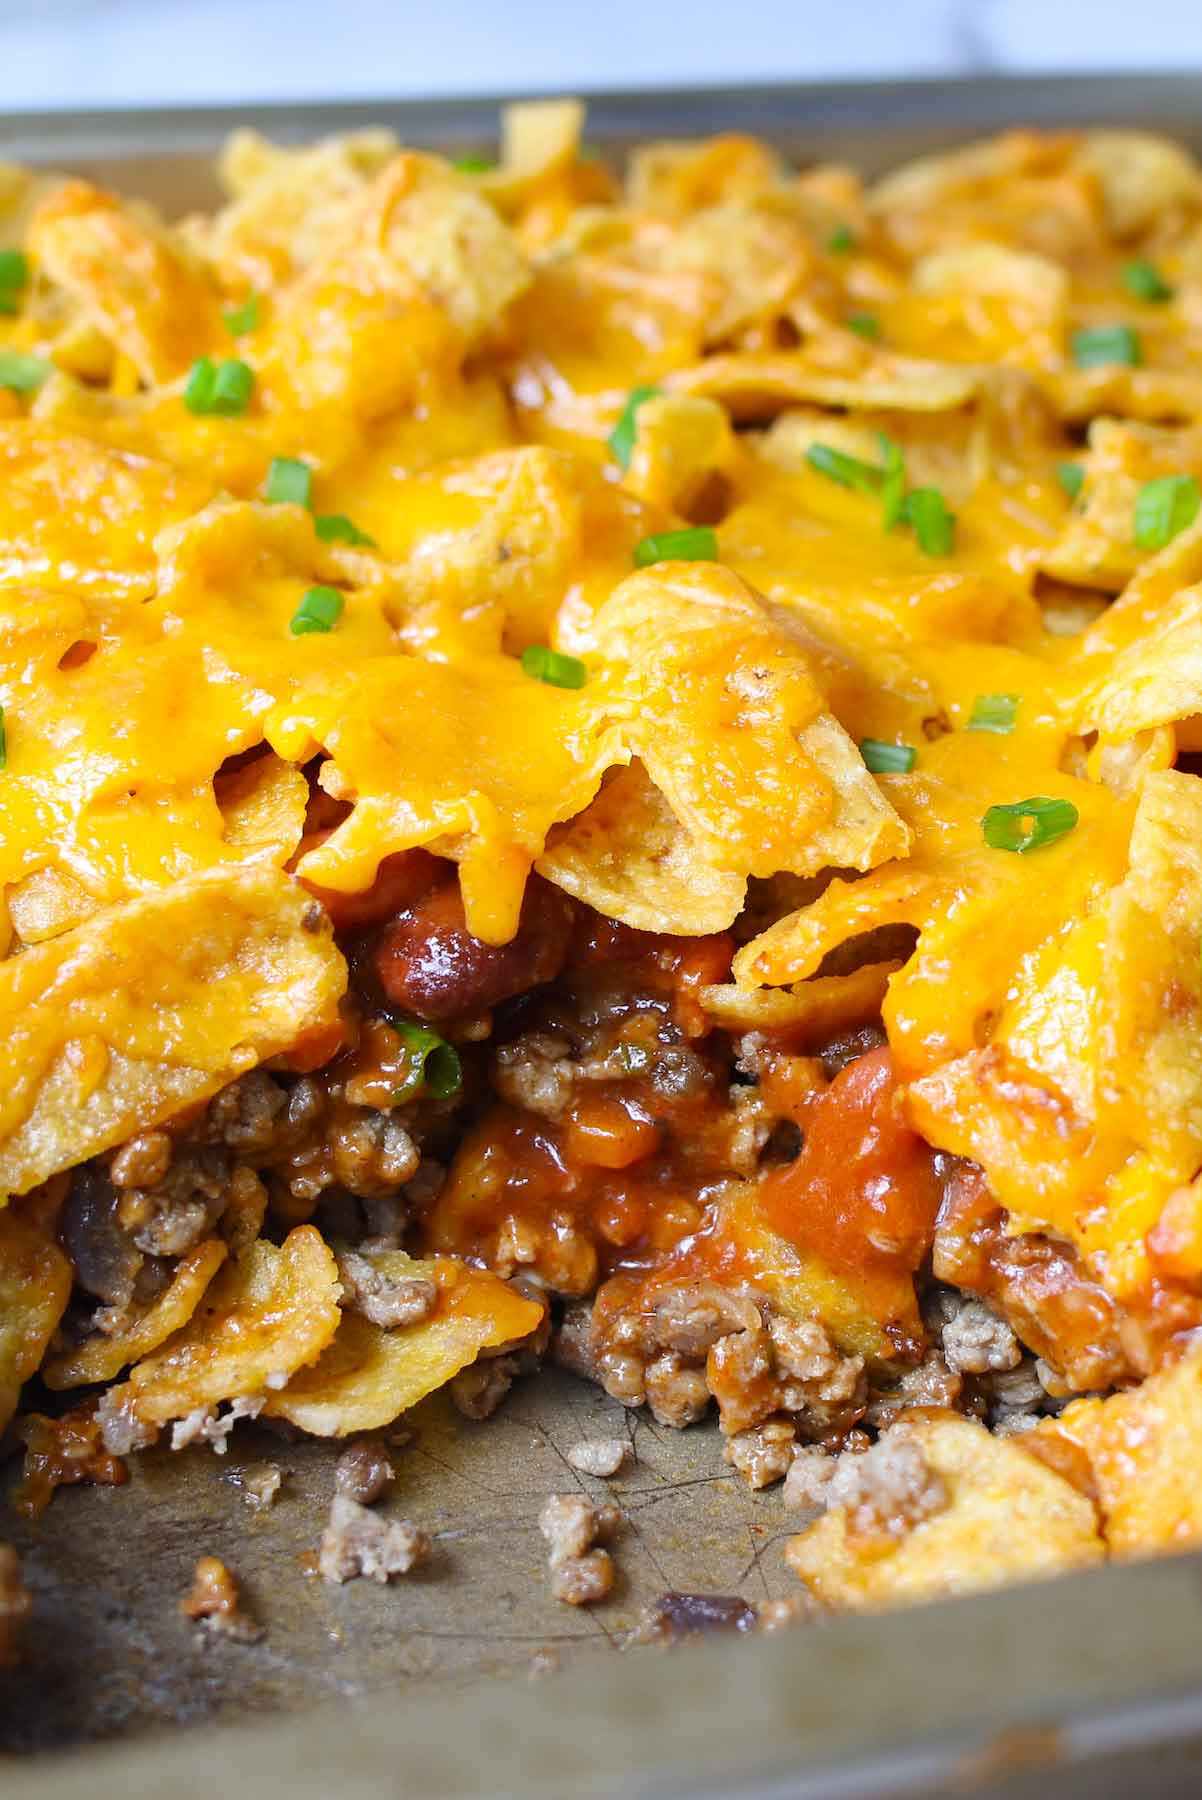 Take everything you love about a taco salad and turn it into a warm, cheesy, baked Walking Taco Casserole! The entire family will love this Tex-Mex recipe, with its succulent ground beef, gooey cheddar cheese and crunchy Fritos, Doritos, or Tortilla Chips. It’s easy to assemble ahead of time and bake later for a quick dinner!